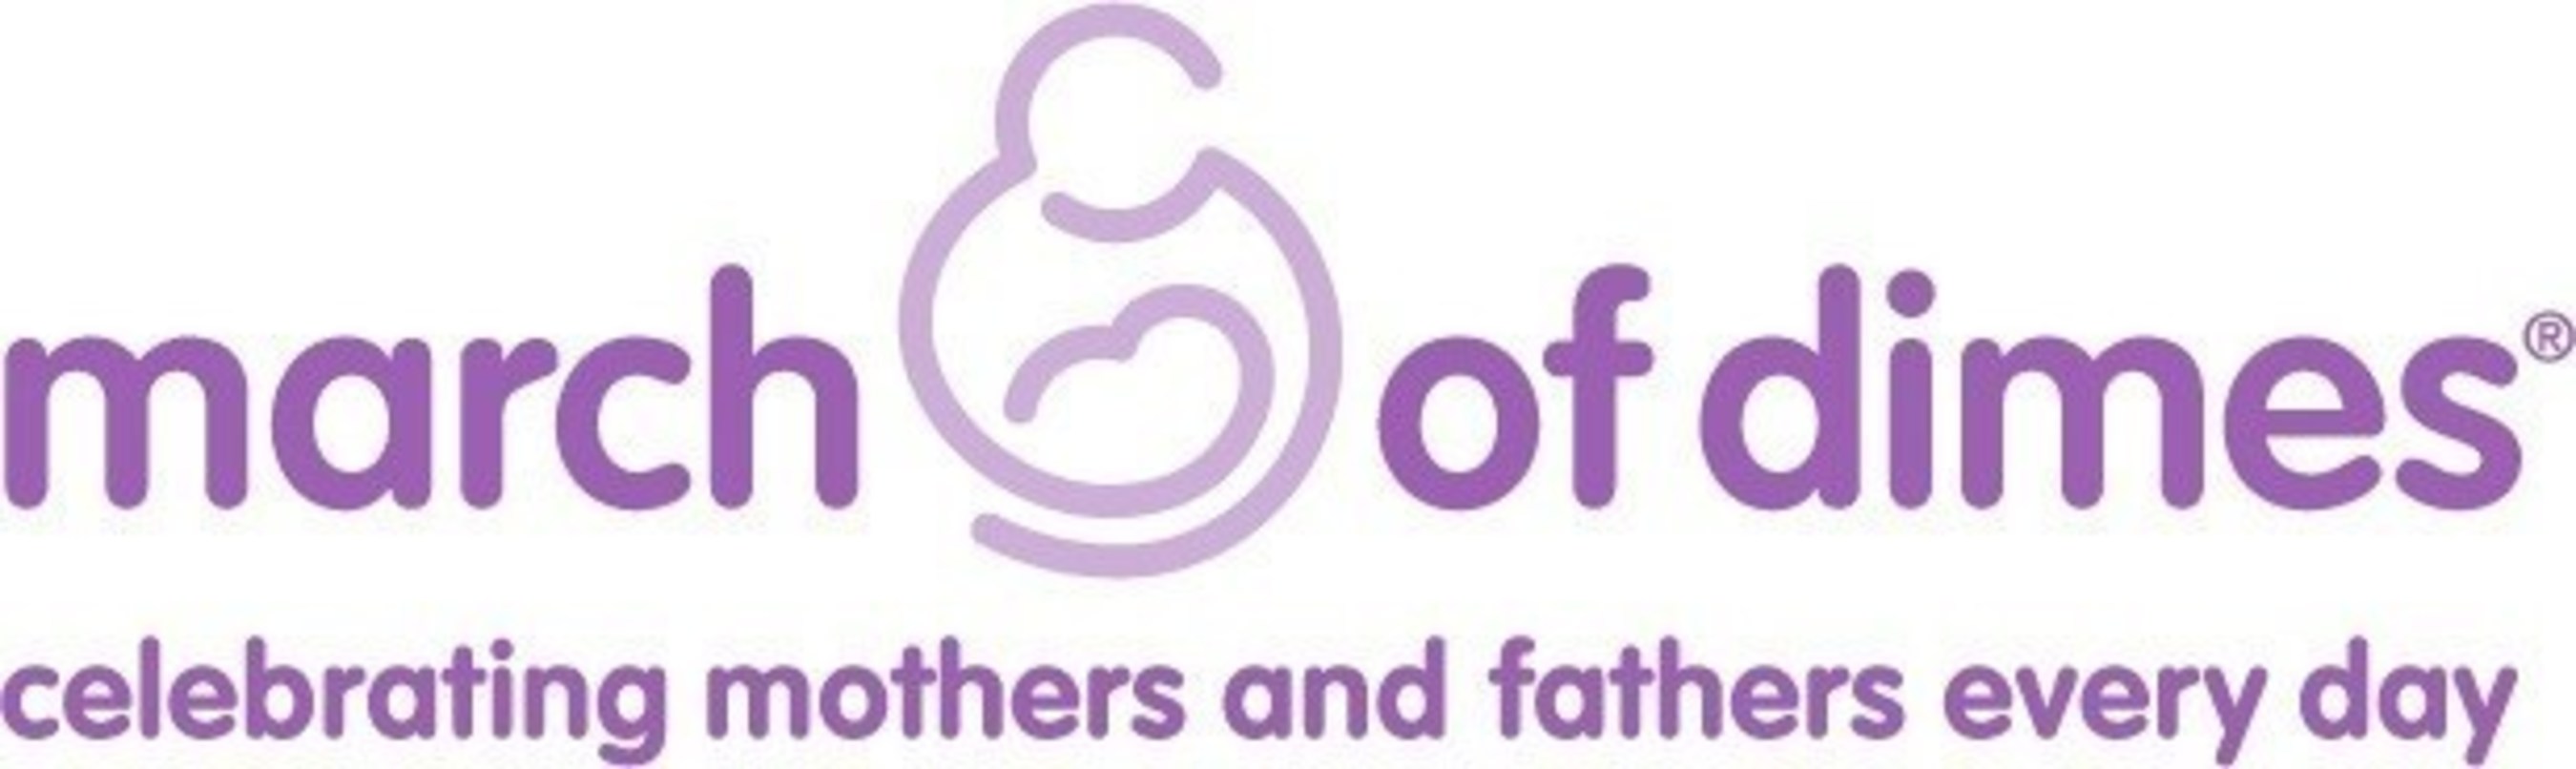 The March of Dimes imbornto campaign is about celebrating and thanking parents for all that they do. From Mother's Day to Father's Day, March of Dimes will encourage consumers to shop, dine or donate where they see the imbornto logo to actively support the cause. For more information, visit imbornto.com.